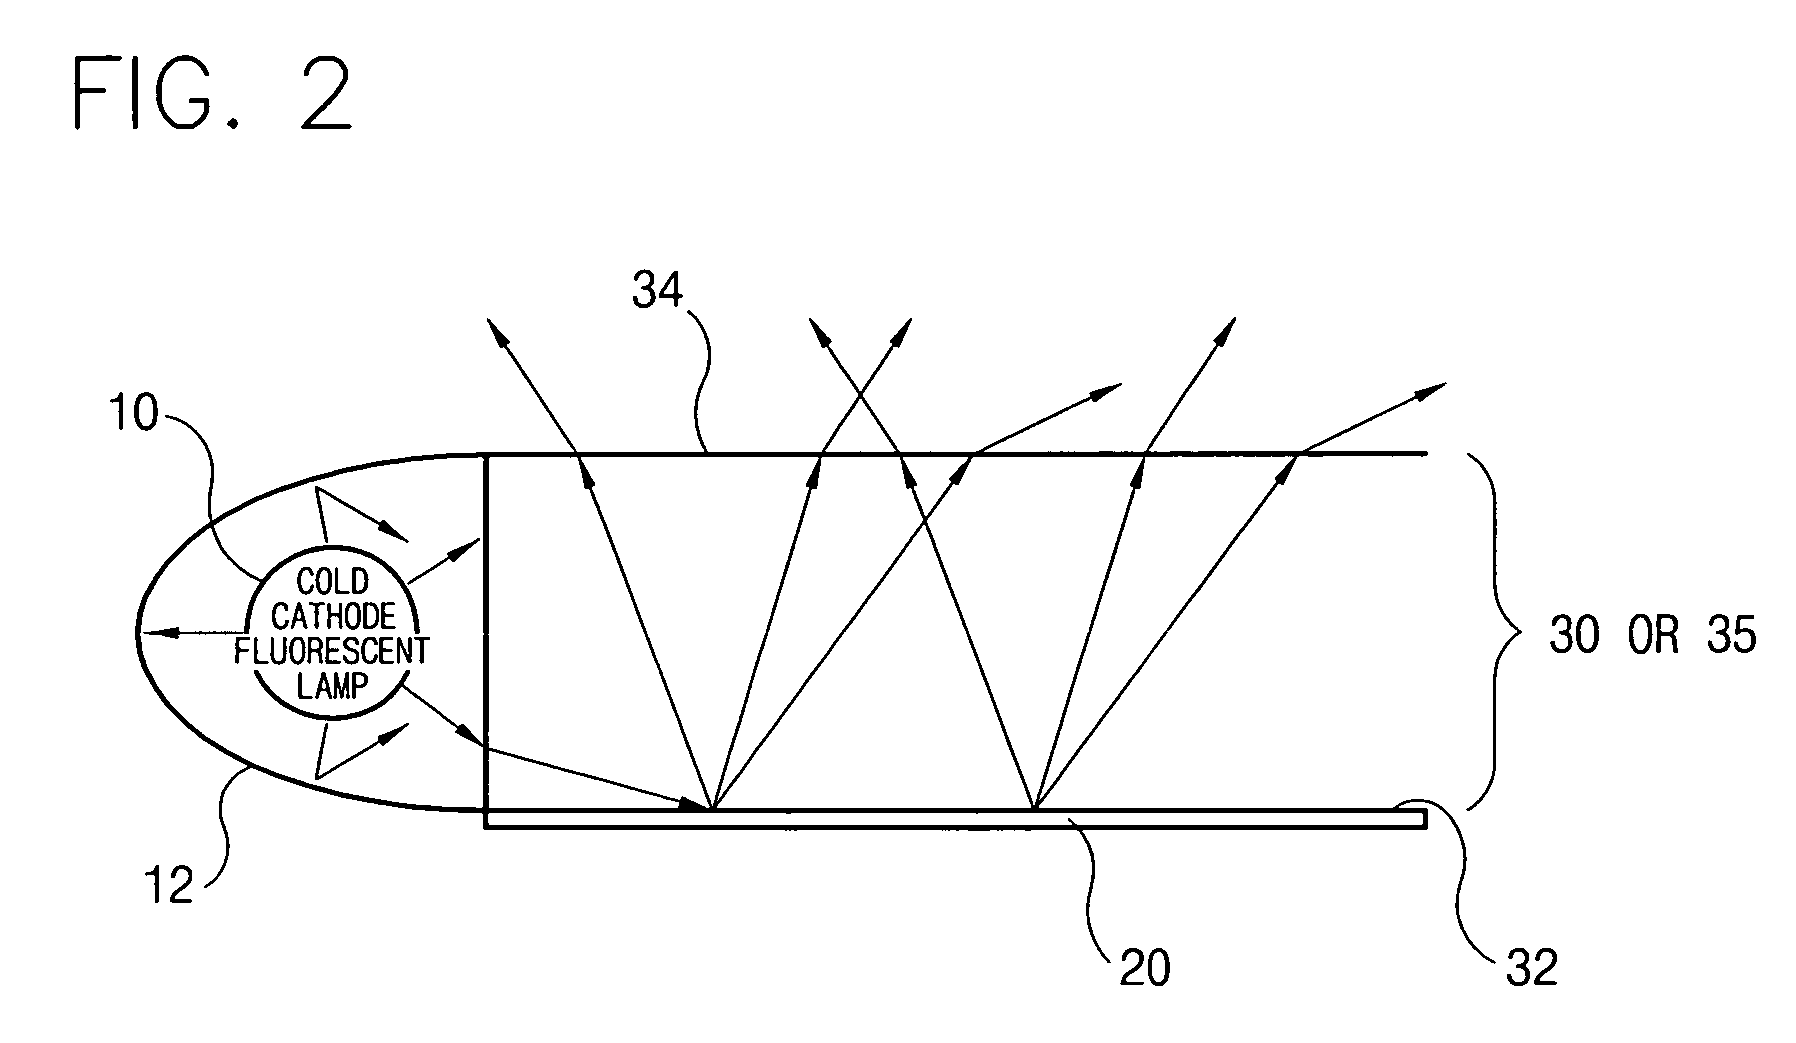 Method of manufacturing a light guiding panel and an apparatus for the same, and a particle blasting apparatus for manufacturing the light guiding panel